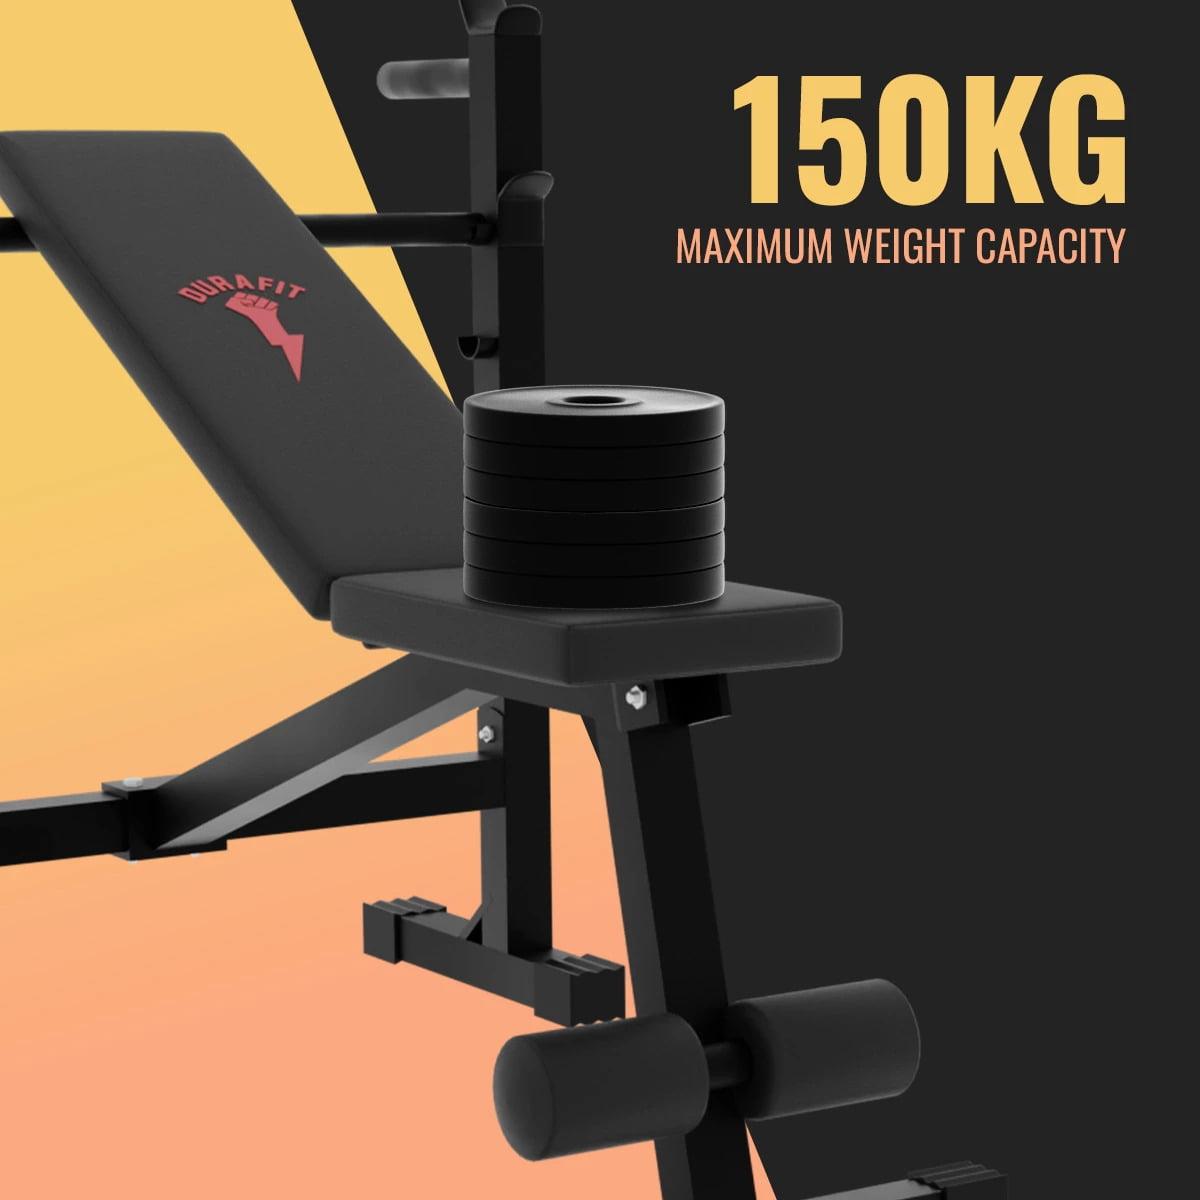 Durafit Multifunction Bench OMFB1 with Max user weight 150kg